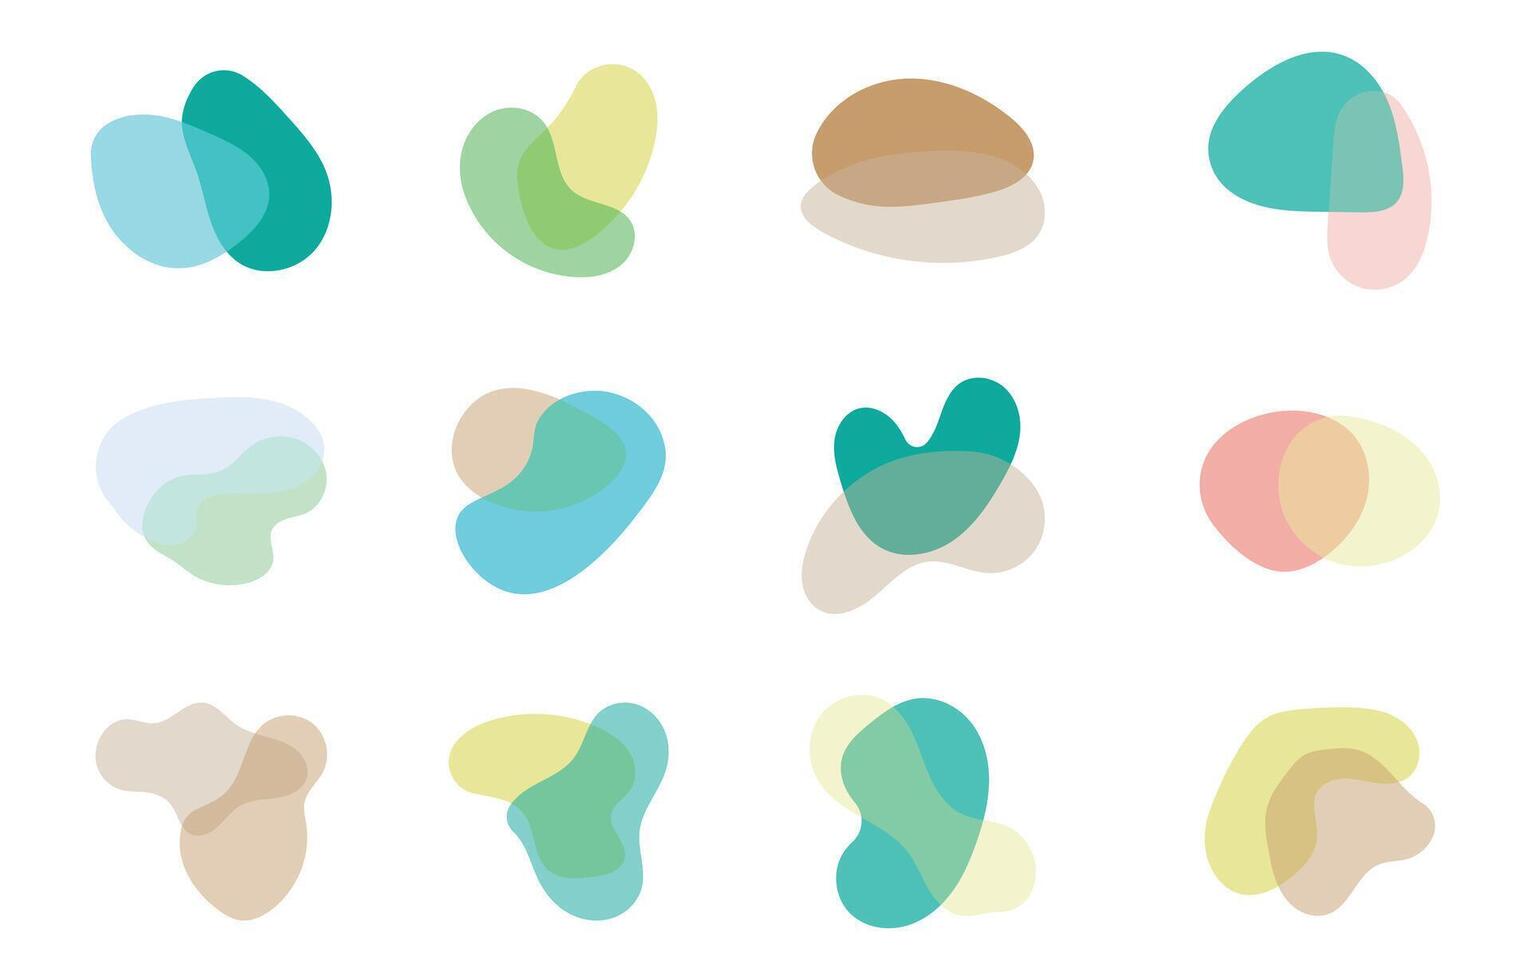 Colorful Blob Shapes Collection with Pastel Color, Isolated on White Background. Organic Liquid and Abstract Irregular Forms. Vector Design Elements for Creative Banners and Decorations